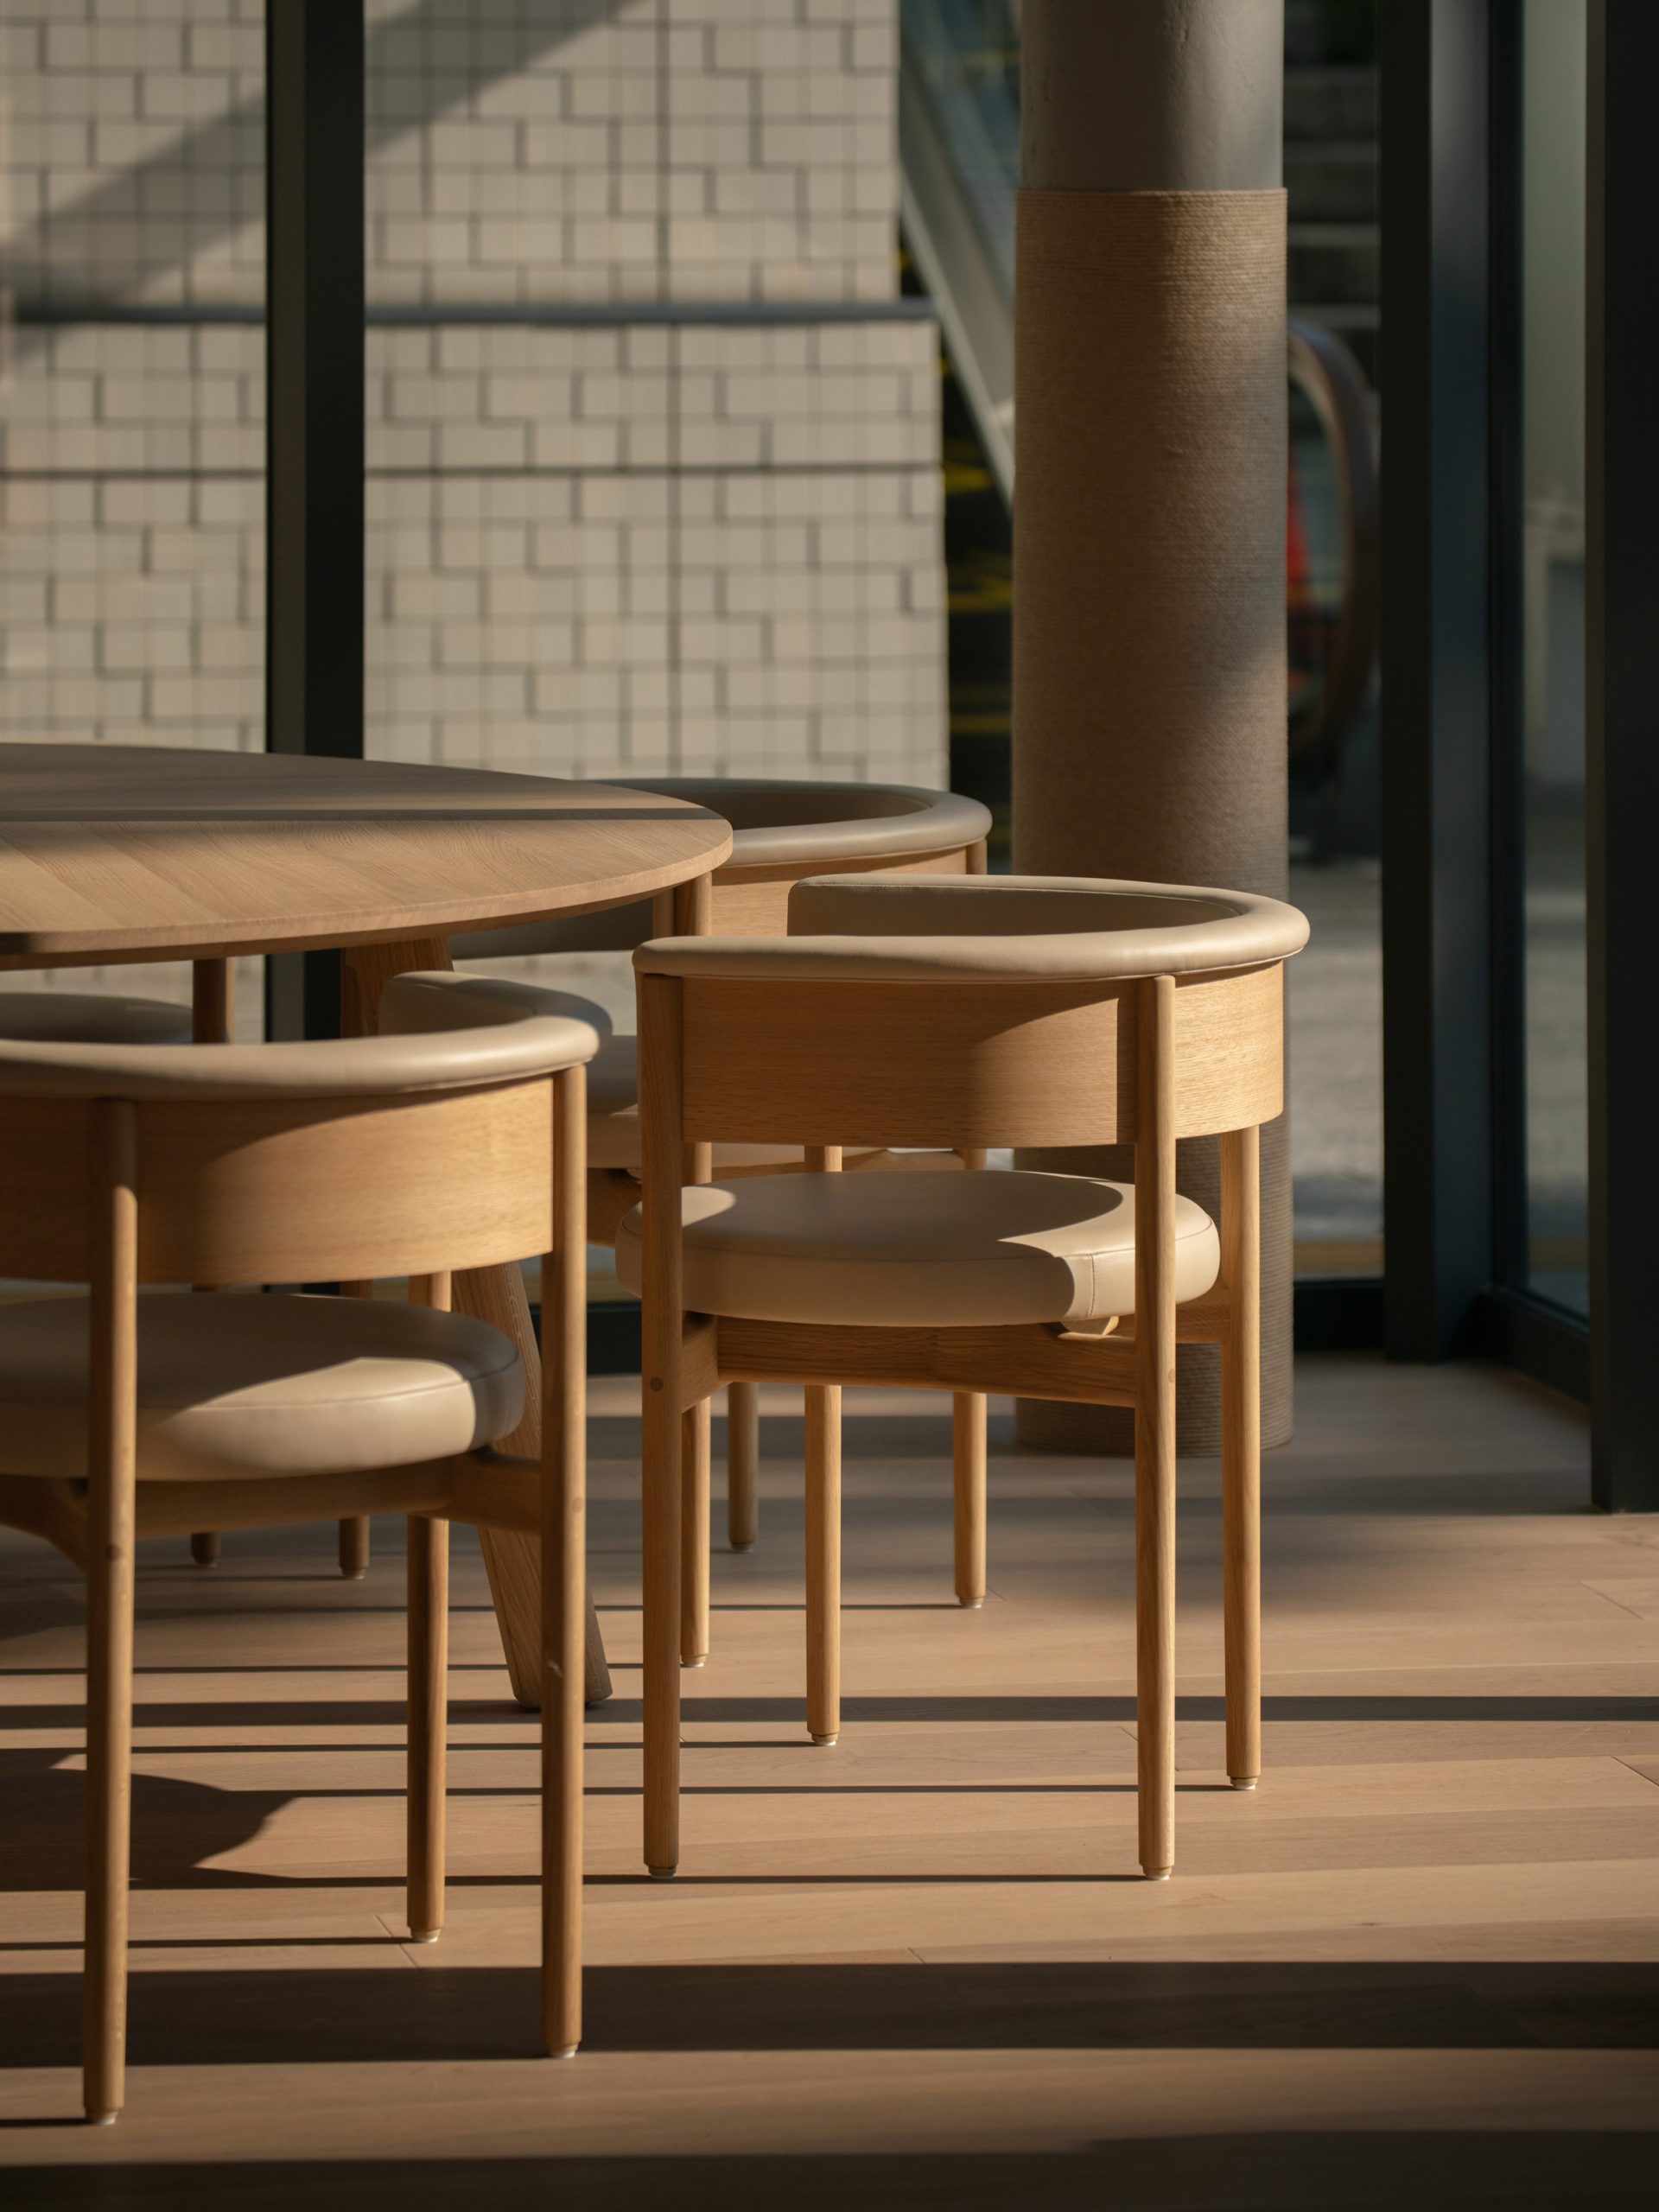 Blue Bottle Coffee cafe in Minatomirai includes chairs designed by Norm Architects